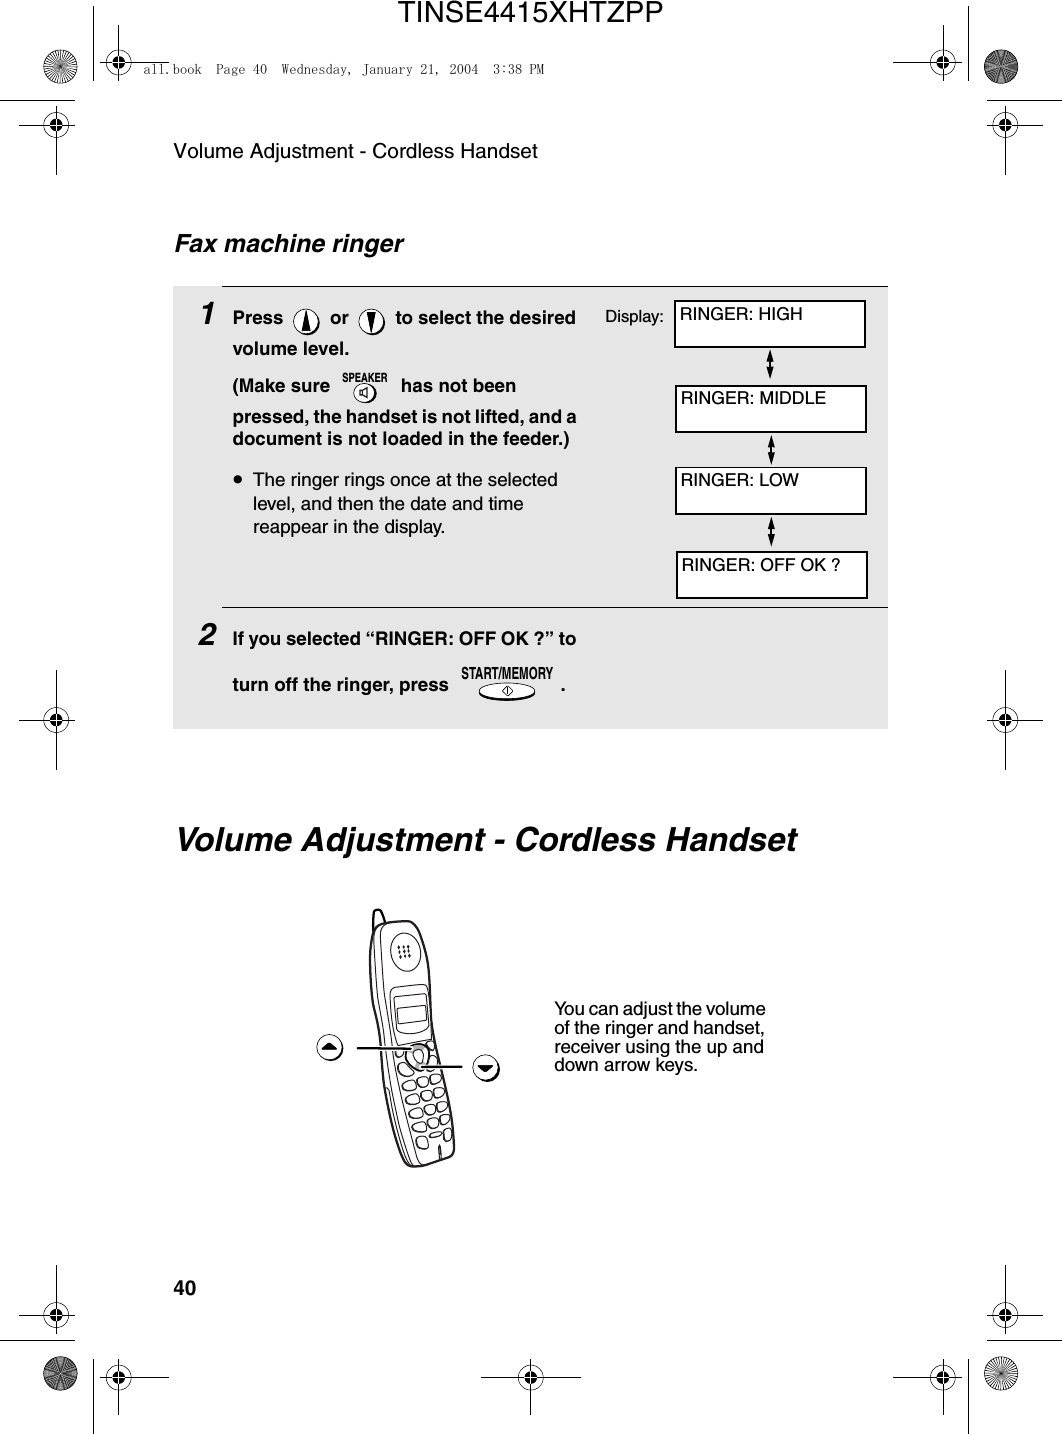 Volume Adjustment - Cordless Handset401Press   or   to select the desired volume level. (Make sure   has not been pressed, the handset is not lifted, and a document is not loaded in the feeder.)•The ringer rings once at the selected level, and then the date and time reappear in the display.2If you selected “RINGER: OFF OK ?” to turn off the ringer, press  .SPEAKERSTART/MEMORYFax machine ringerDisplay:Volume Adjustment - Cordless HandsetYou can adjust the volume of the ringer and handset, receiver using the up and down arrow keys.RINGER: HIGHRINGER: MIDDLERINGER: LOWRINGER: OFF OK ?all.book  Page 40  Wednesday, January 21, 2004  3:38 PMTINSE4415XHTZPP